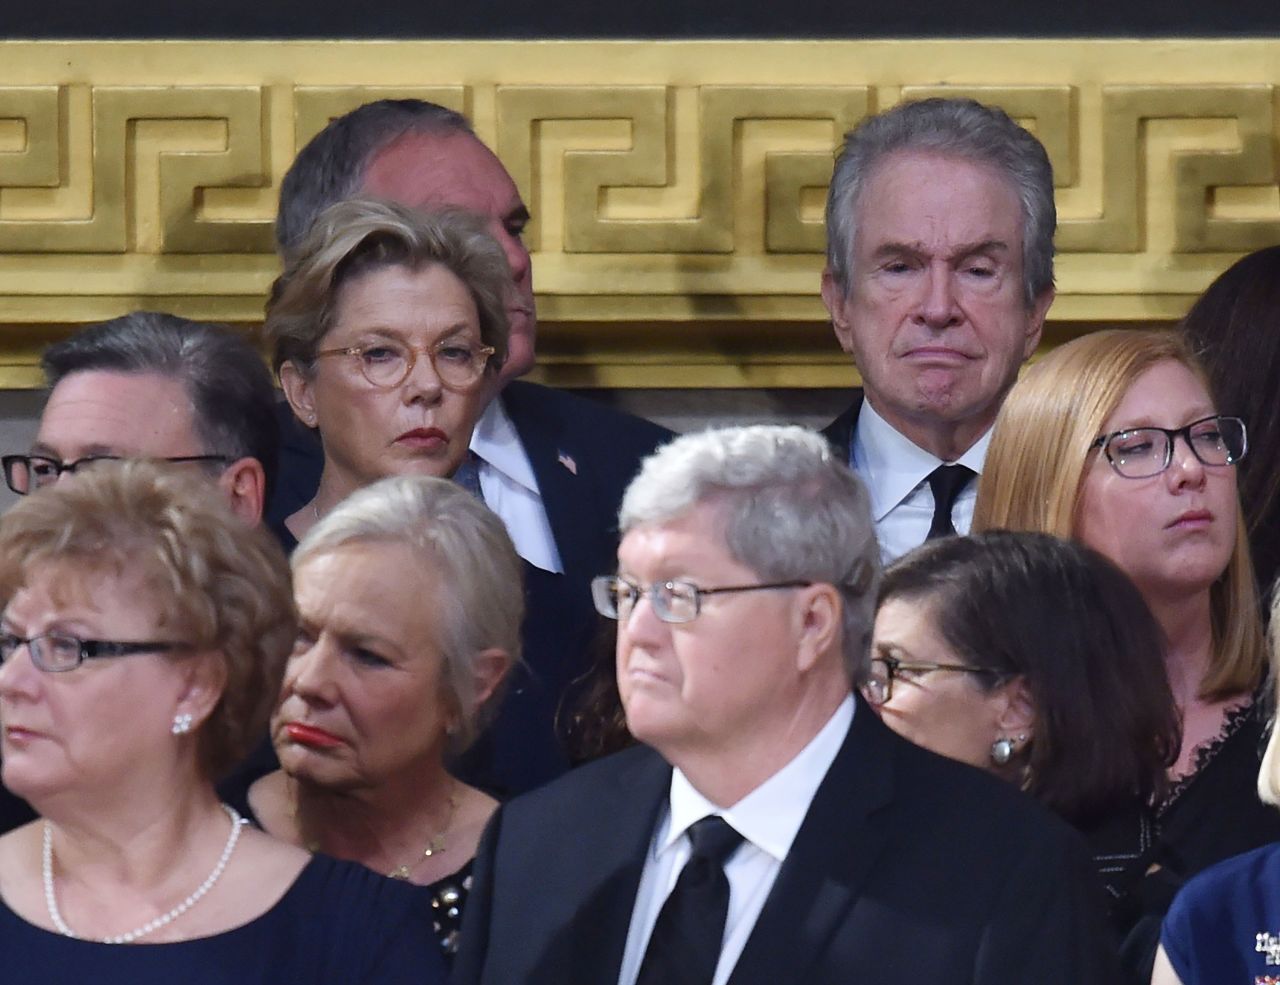 Among the guests Friday were actors Annette Bening, back left, and Warren Beatty.